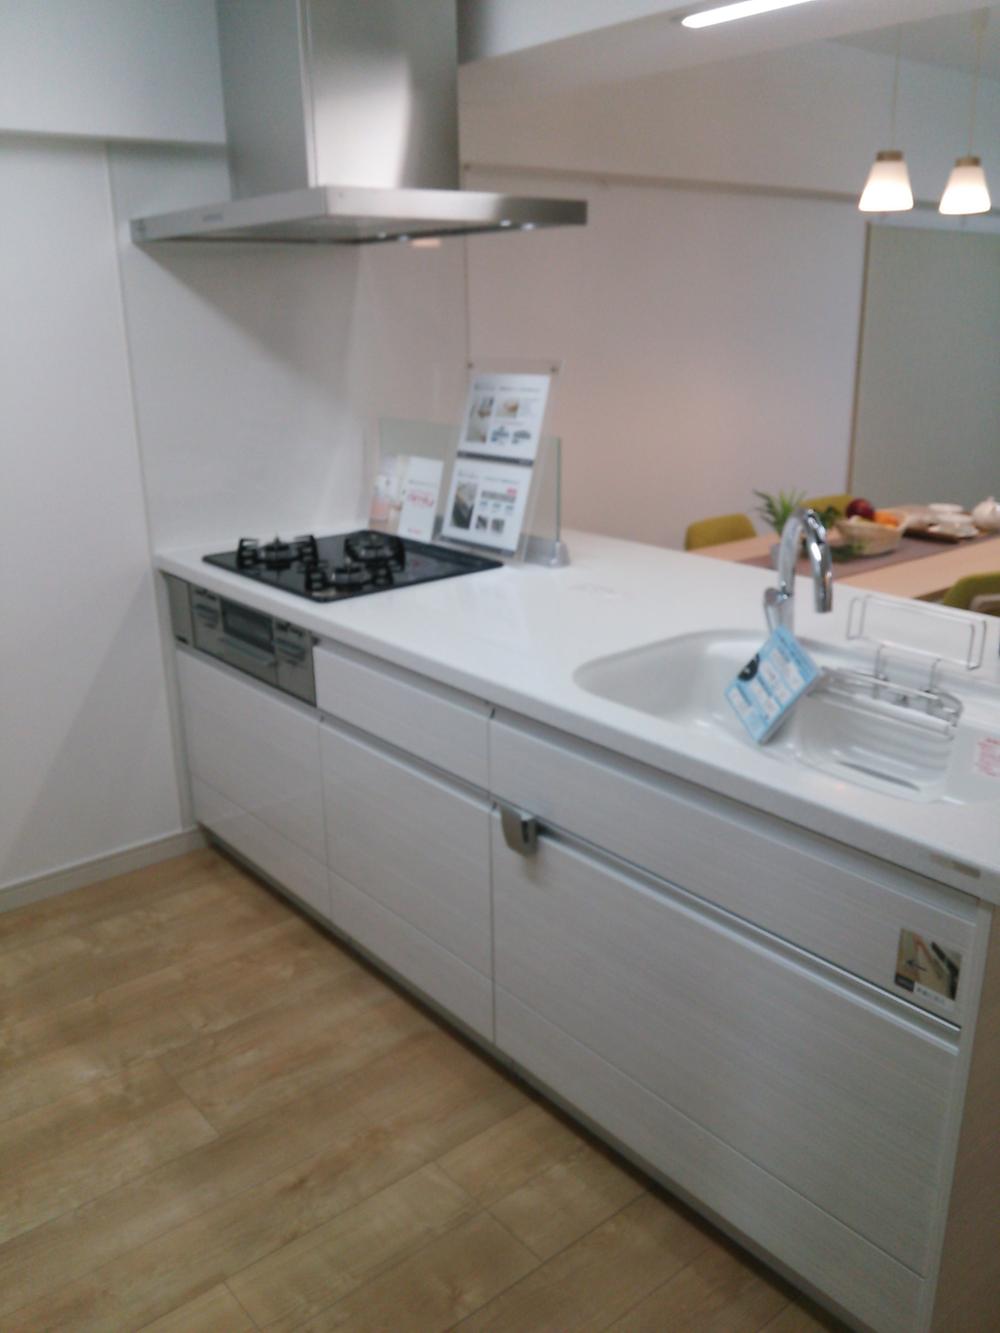 Same specifications photo (kitchen). It is expected to be the same thing.